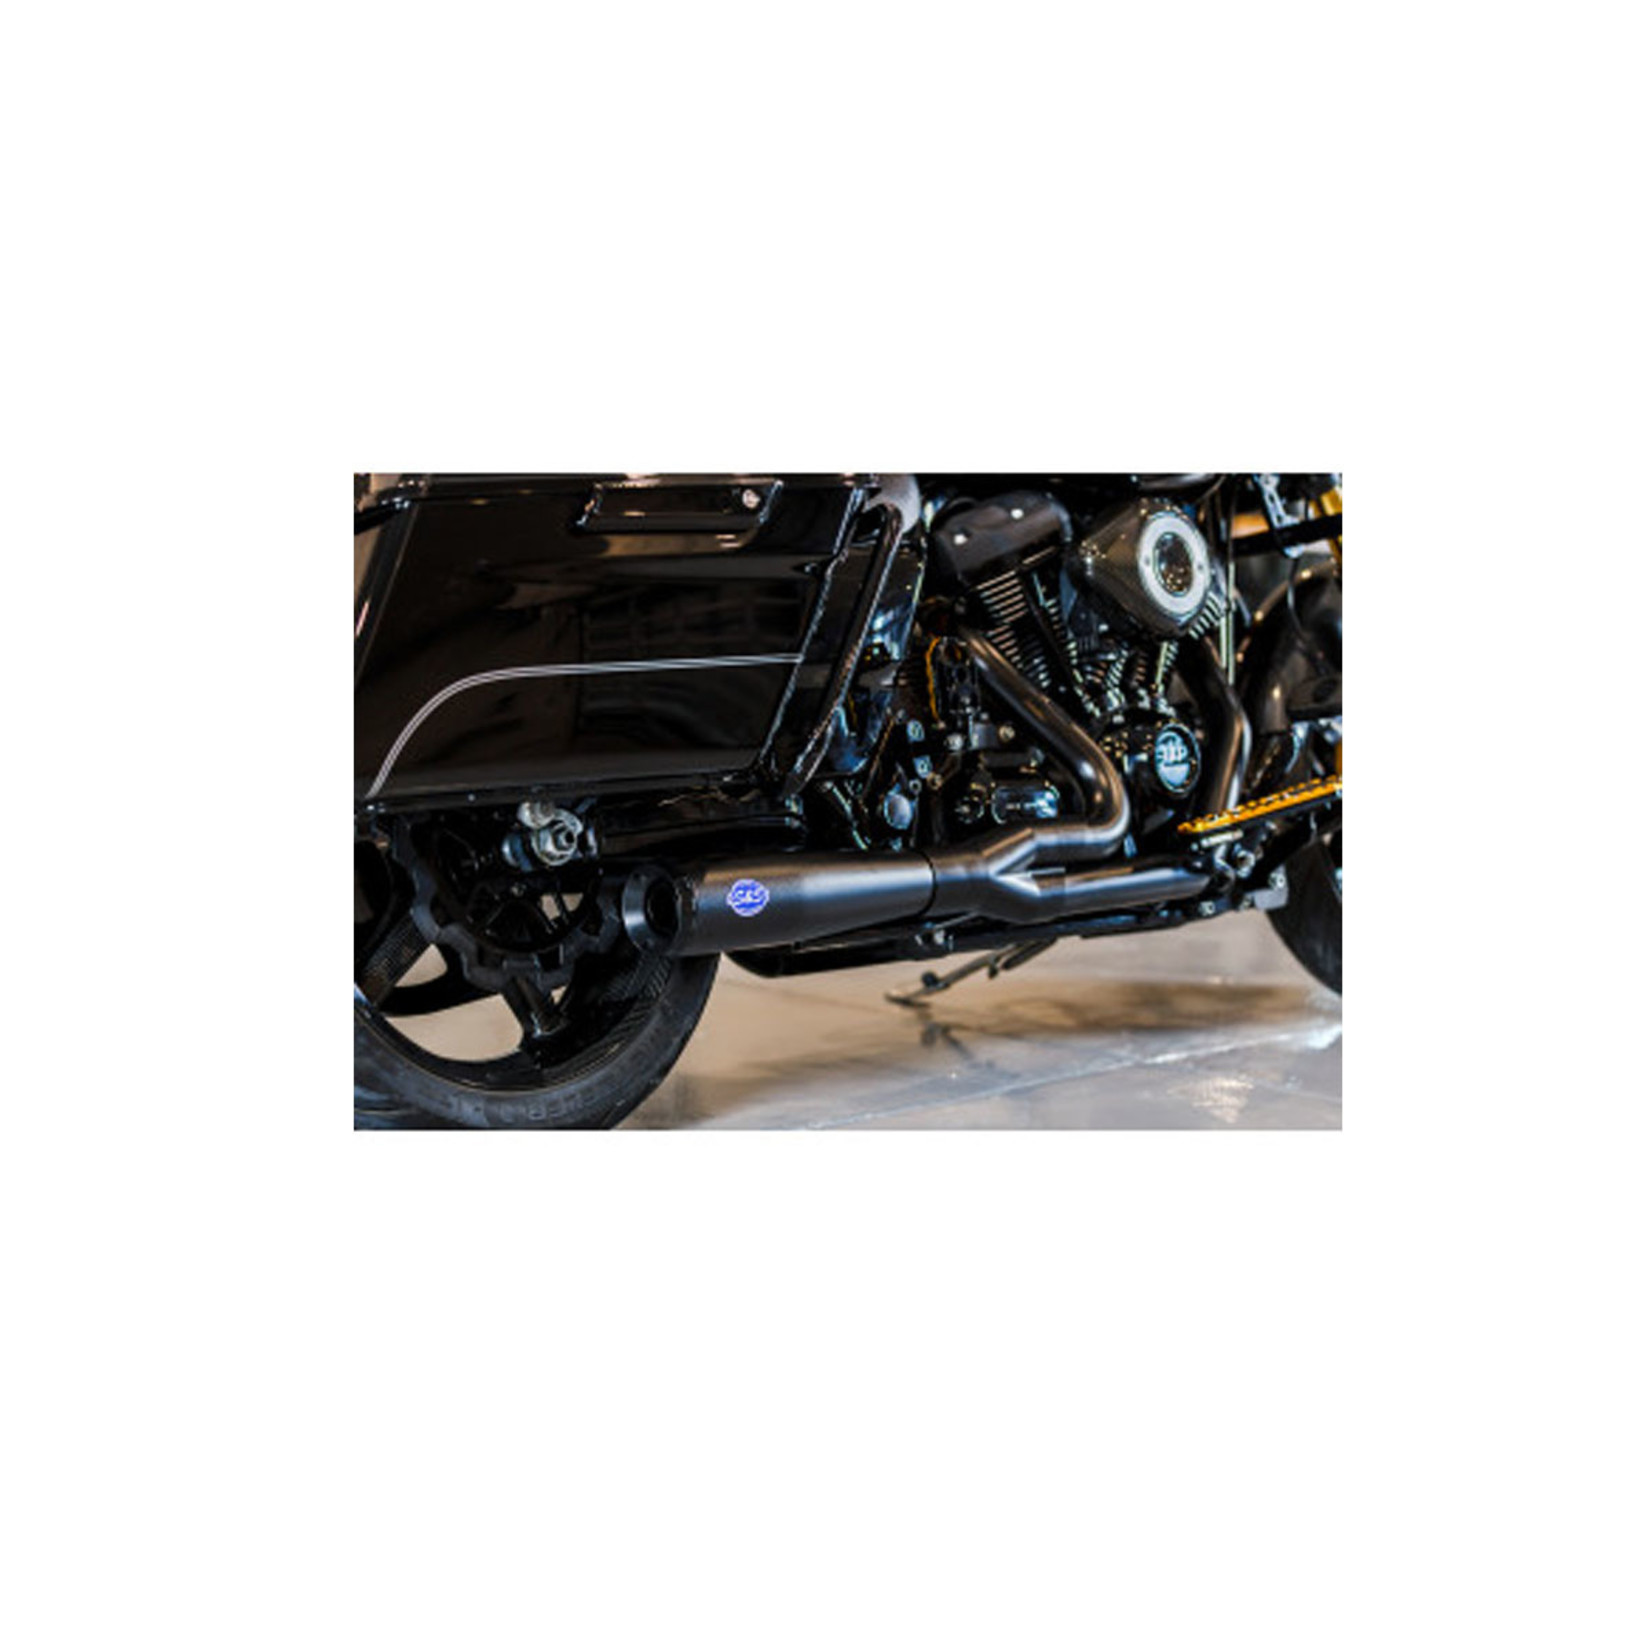 S&S CYCLE S&S CYCLE DIAMONDBACK  2-1 50 STATE EXHAUST SYSTEM, GUARDIAN BLACK  W/ BLACK ENDCAP for 2017-'22 M8 TOURING MODELS